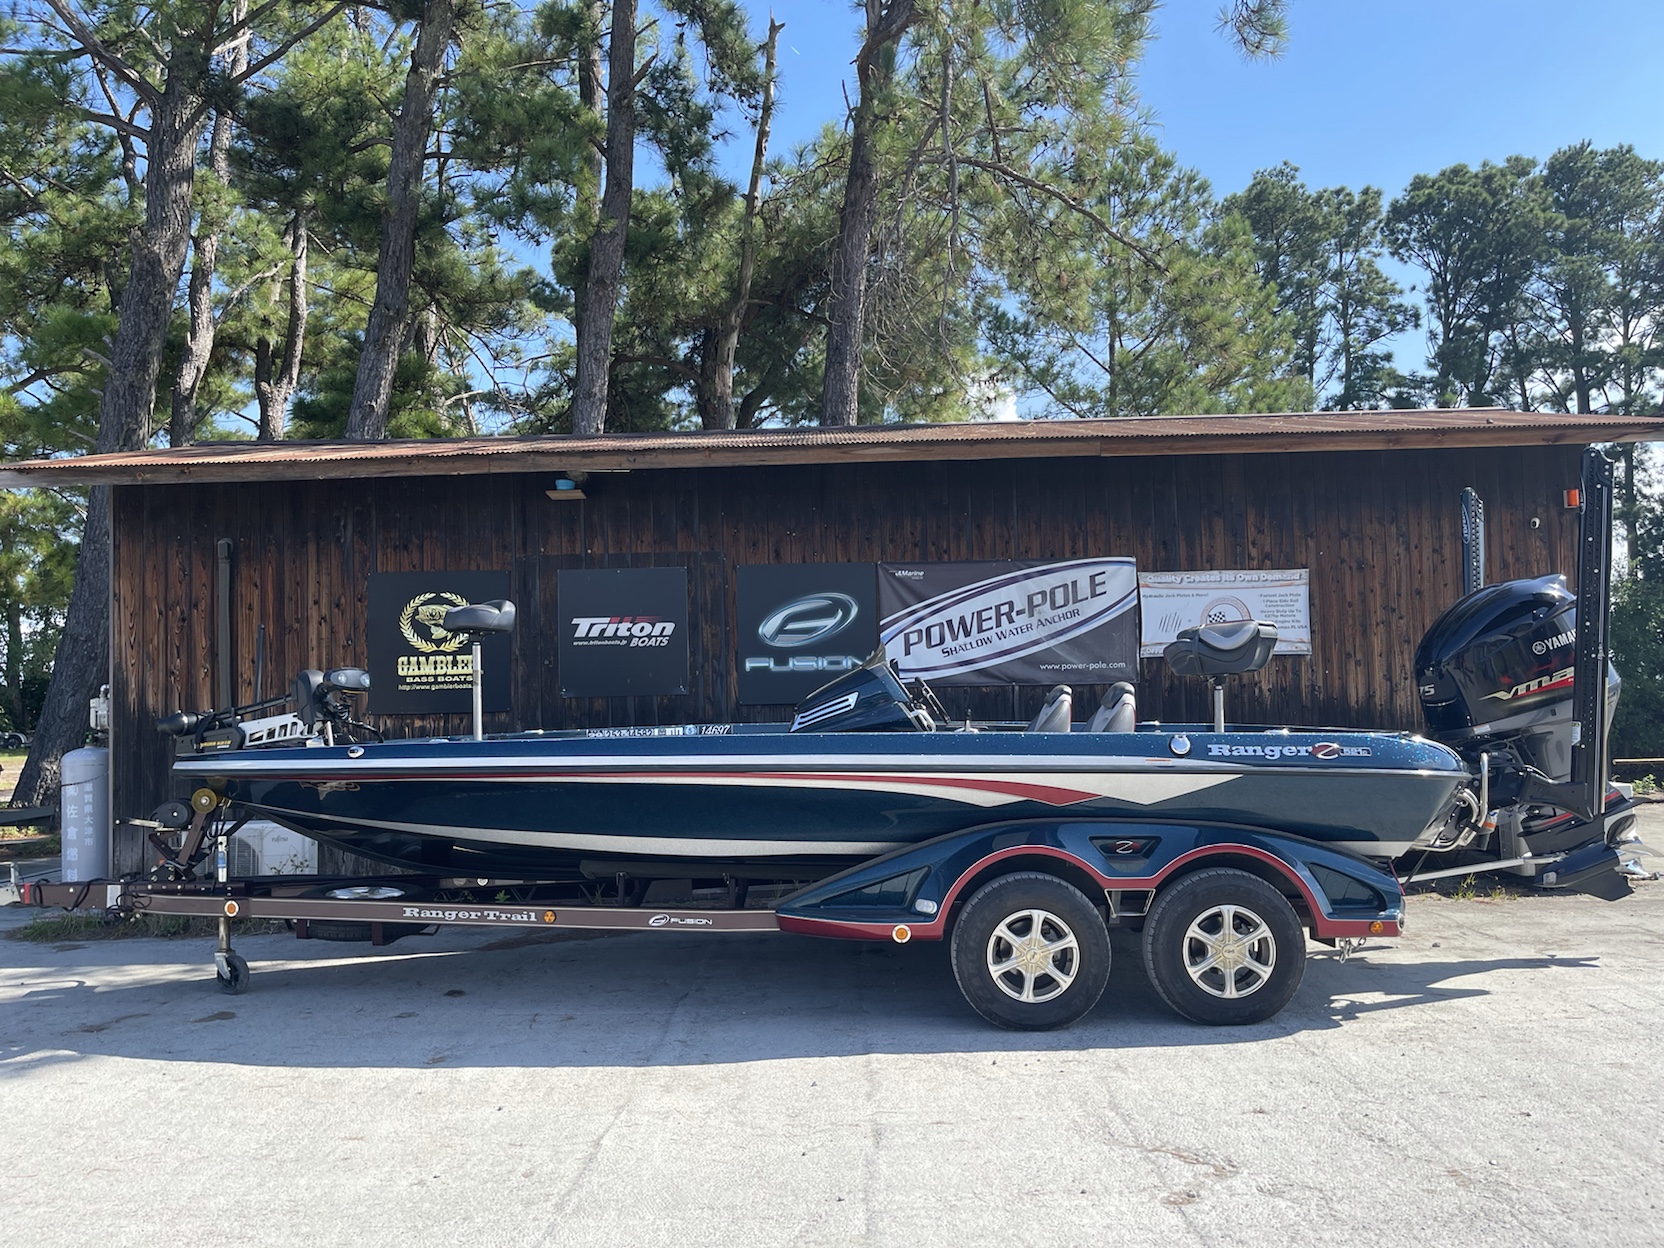 SOLD OUT  ’17 Ranger Boats Z521C with SHO275